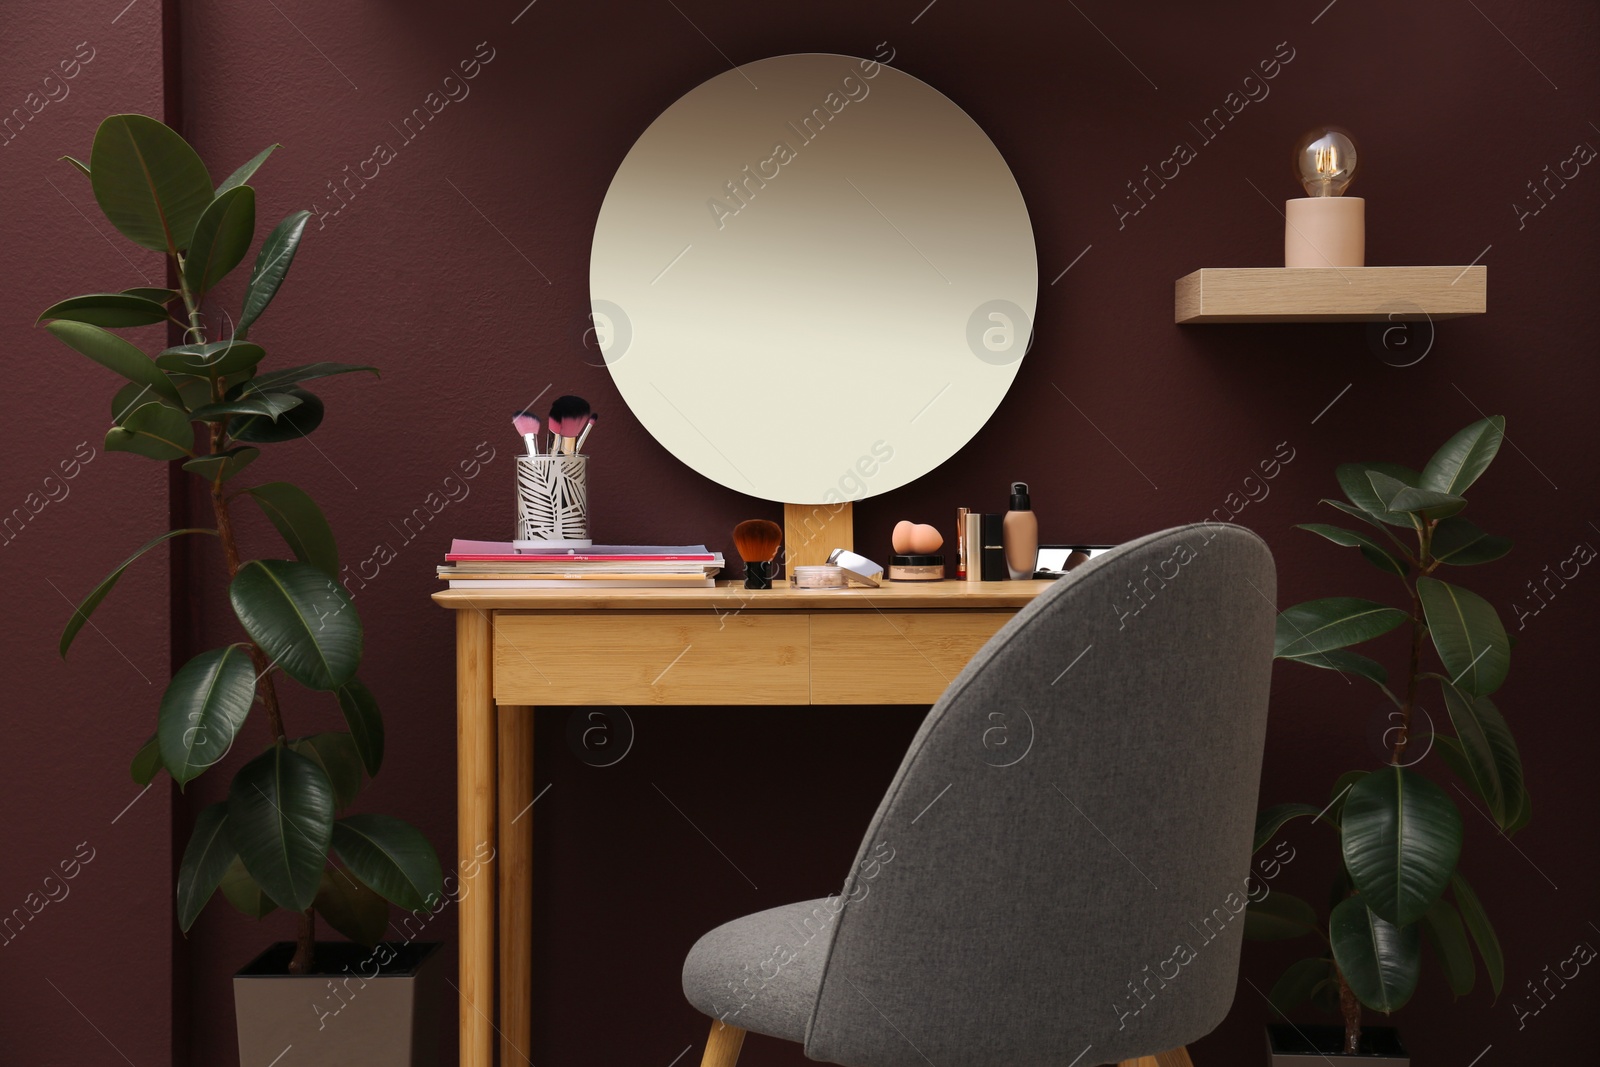 Photo of Wooden dressing table and chair near brown wall in room